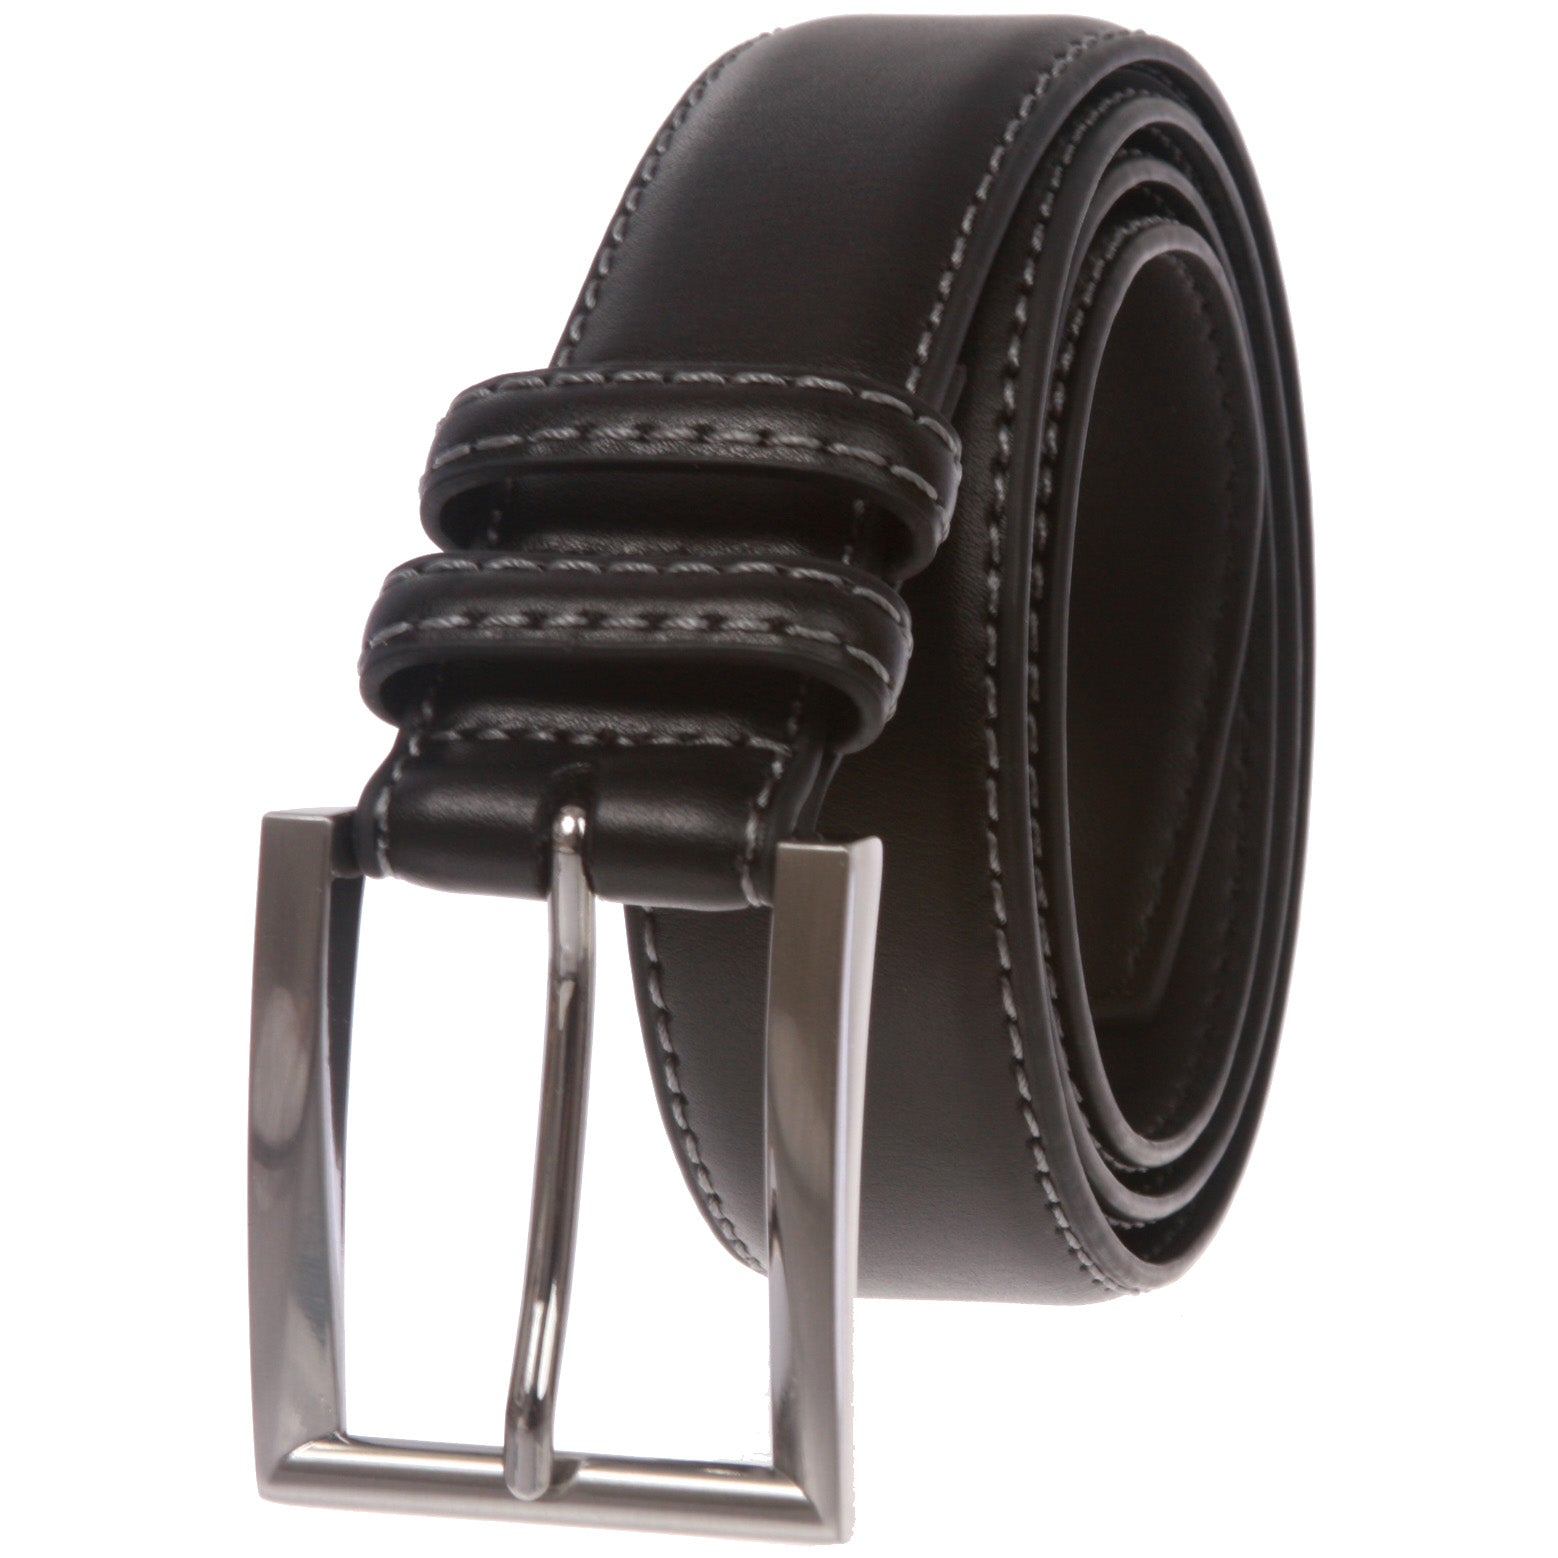 Men's Feather Edged Leather Casual Belt with Stitch Edge